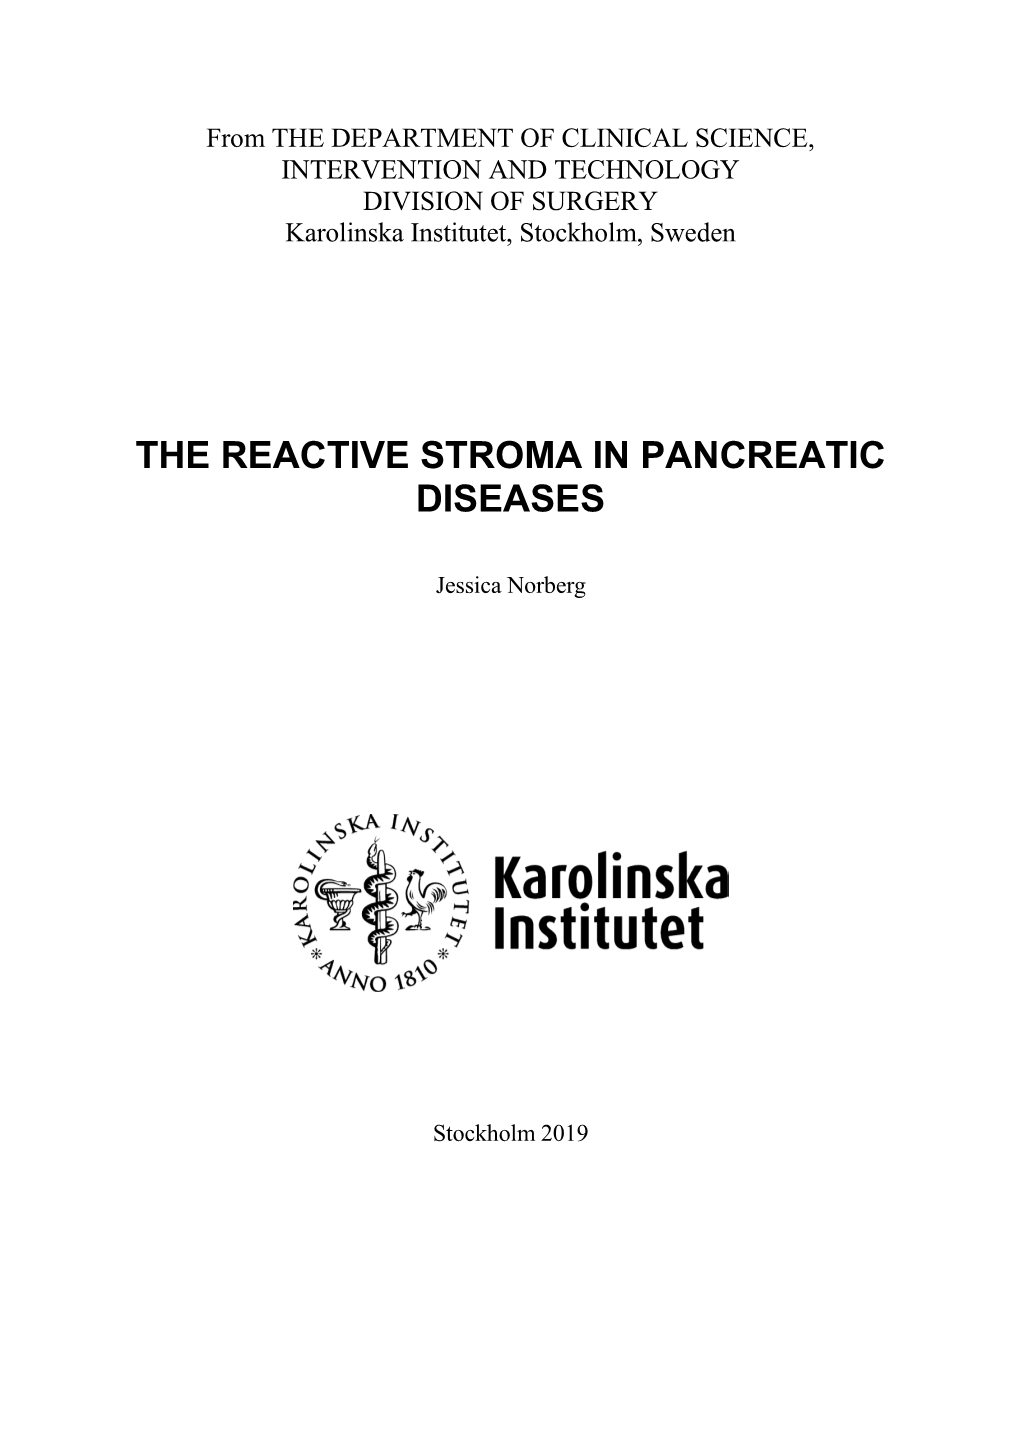 The Reactive Stroma in Pancreatic Diseases